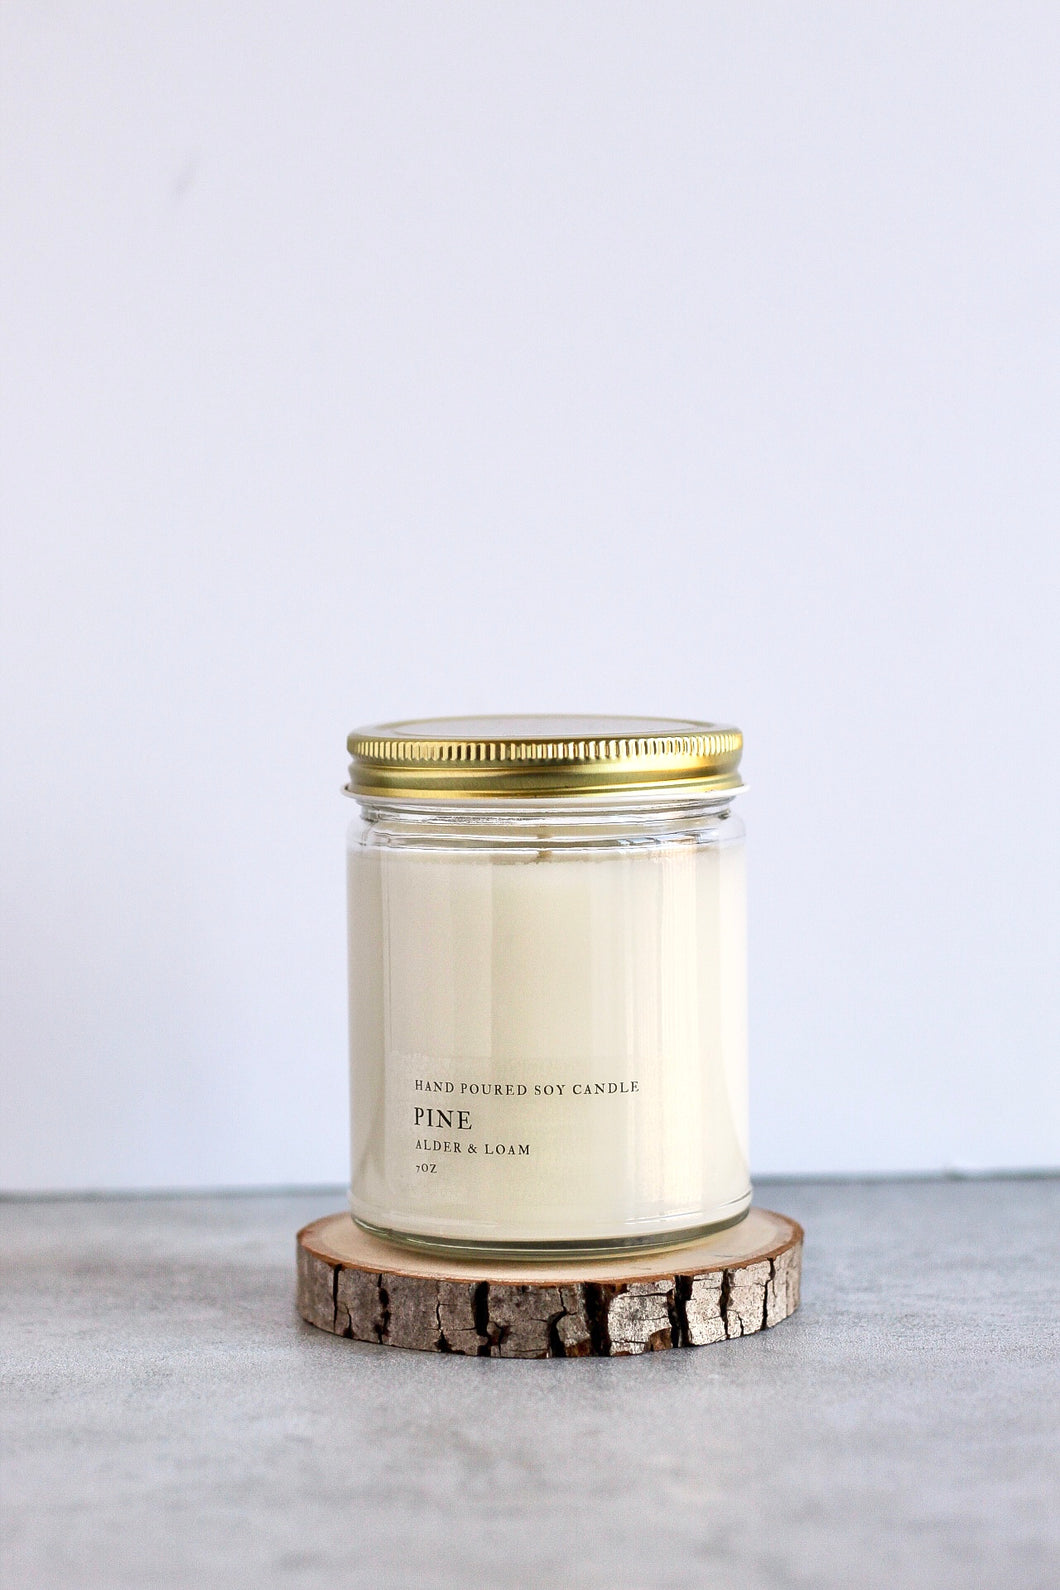 Pine Soy Candle, Hand Poured, Natural, Eco Friendly, Earthy Scent, 7 oz Jar